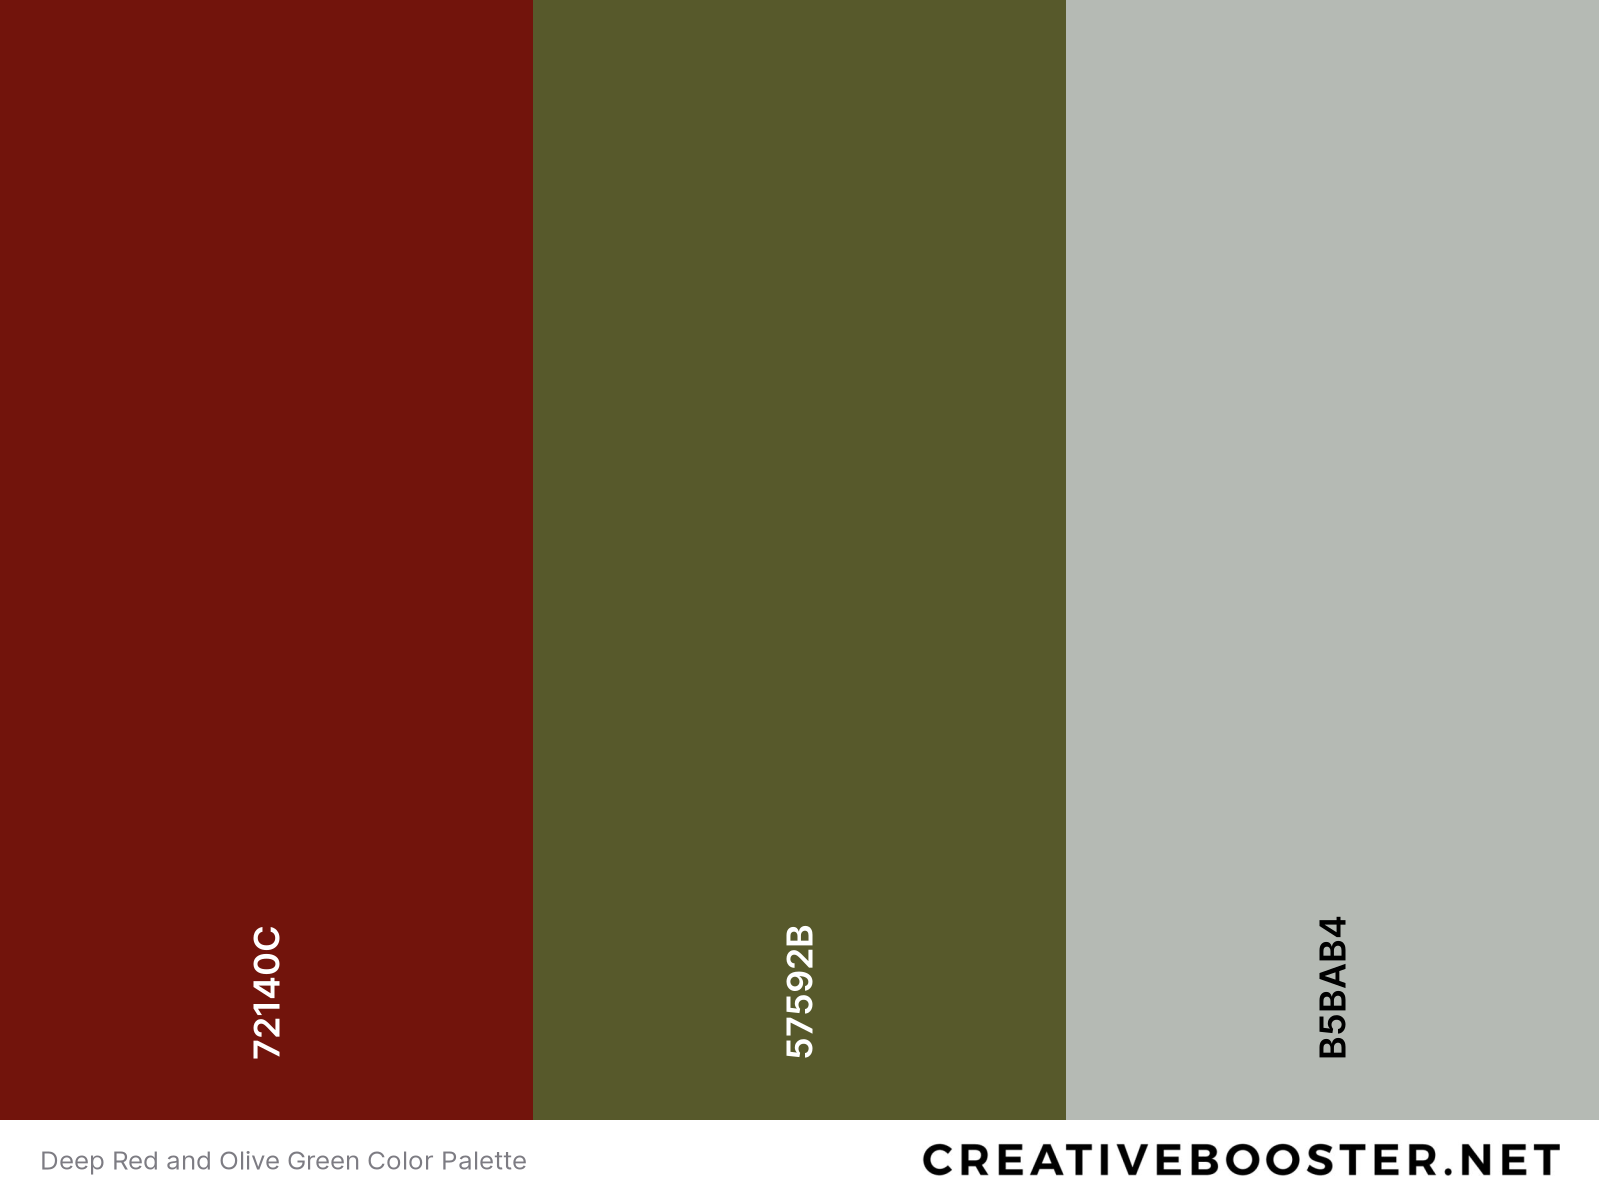 Deep Red and Olive Green Color Palette